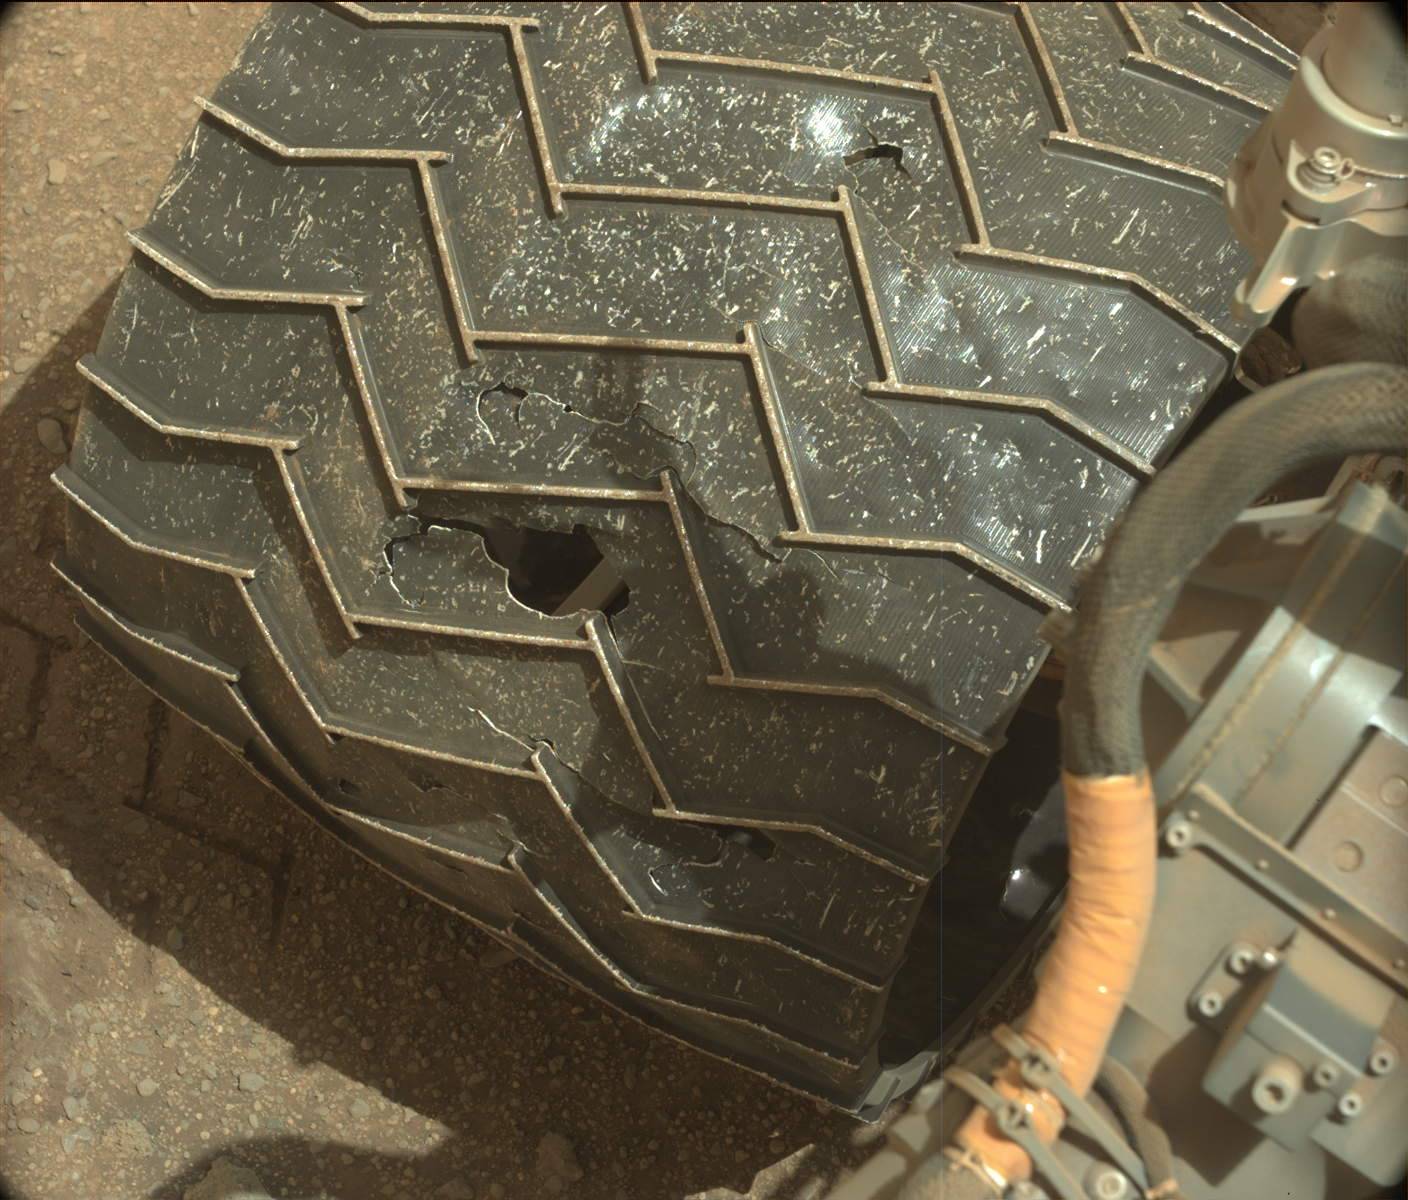 Acht opwinding mild Mars Rover Curiosity Dealing with Wheel Damage